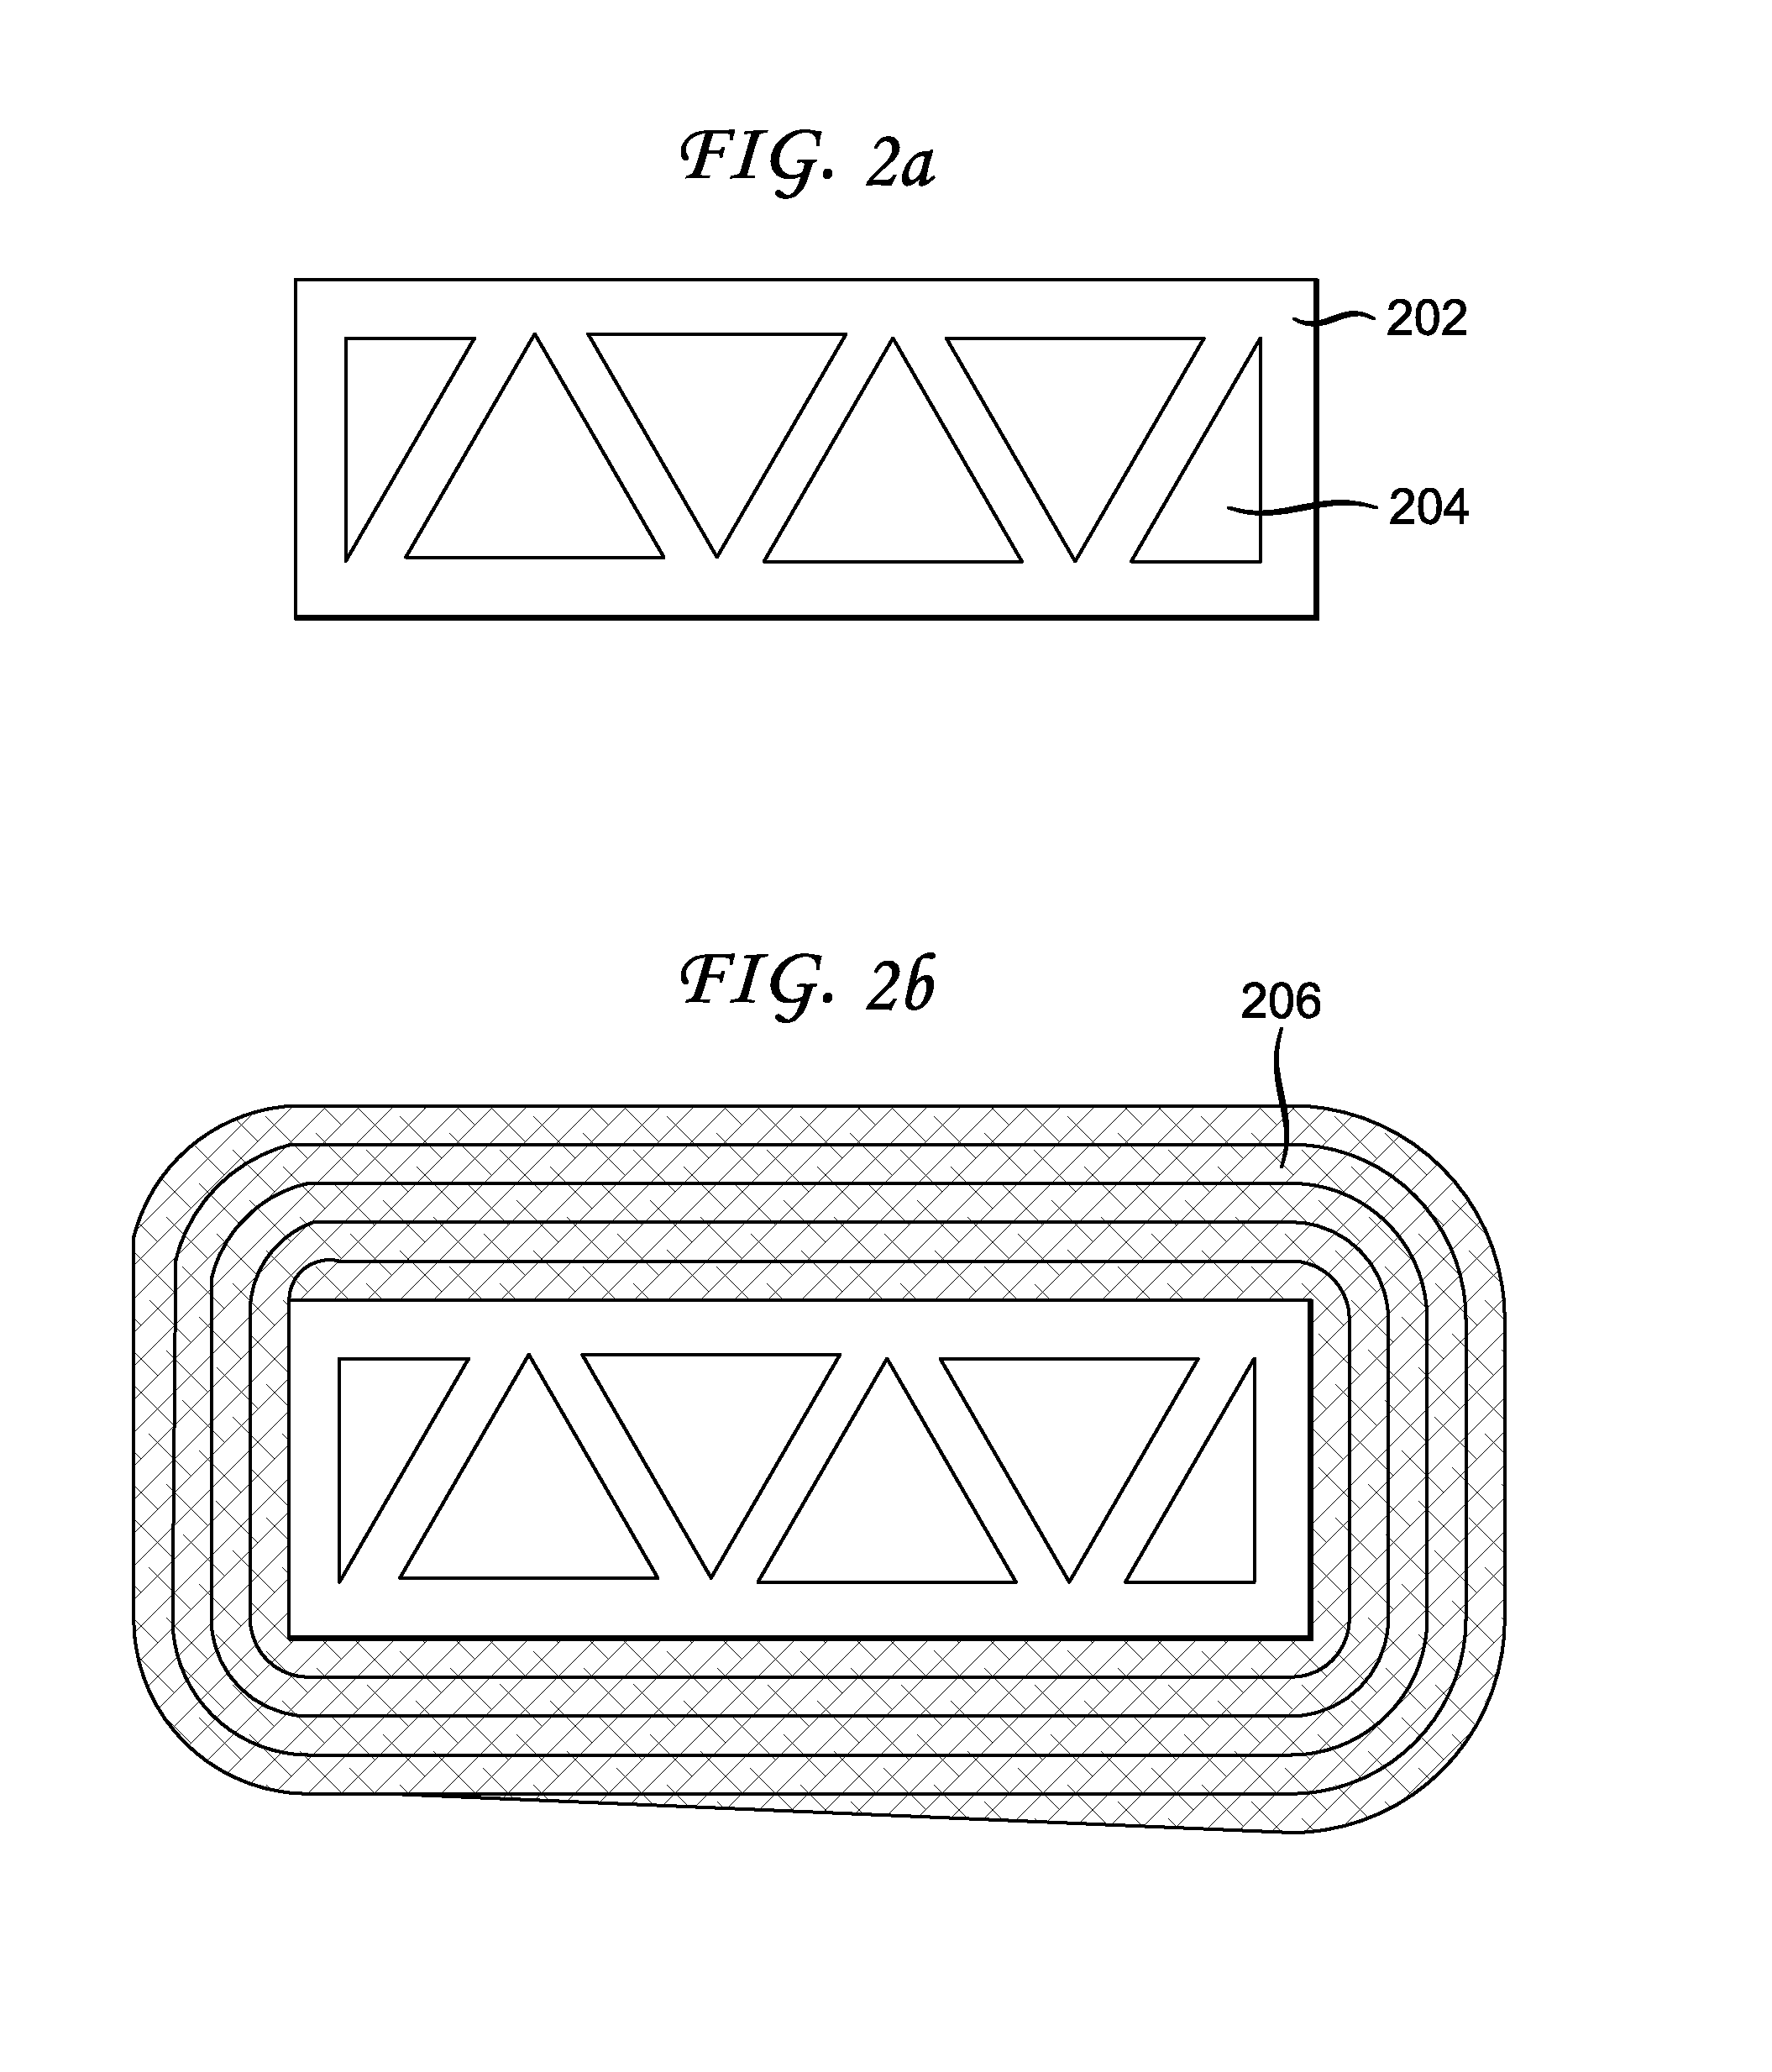 Multi-Functional Hybrid Panel For Blast and Impact Mitigation and Method of Manufacture